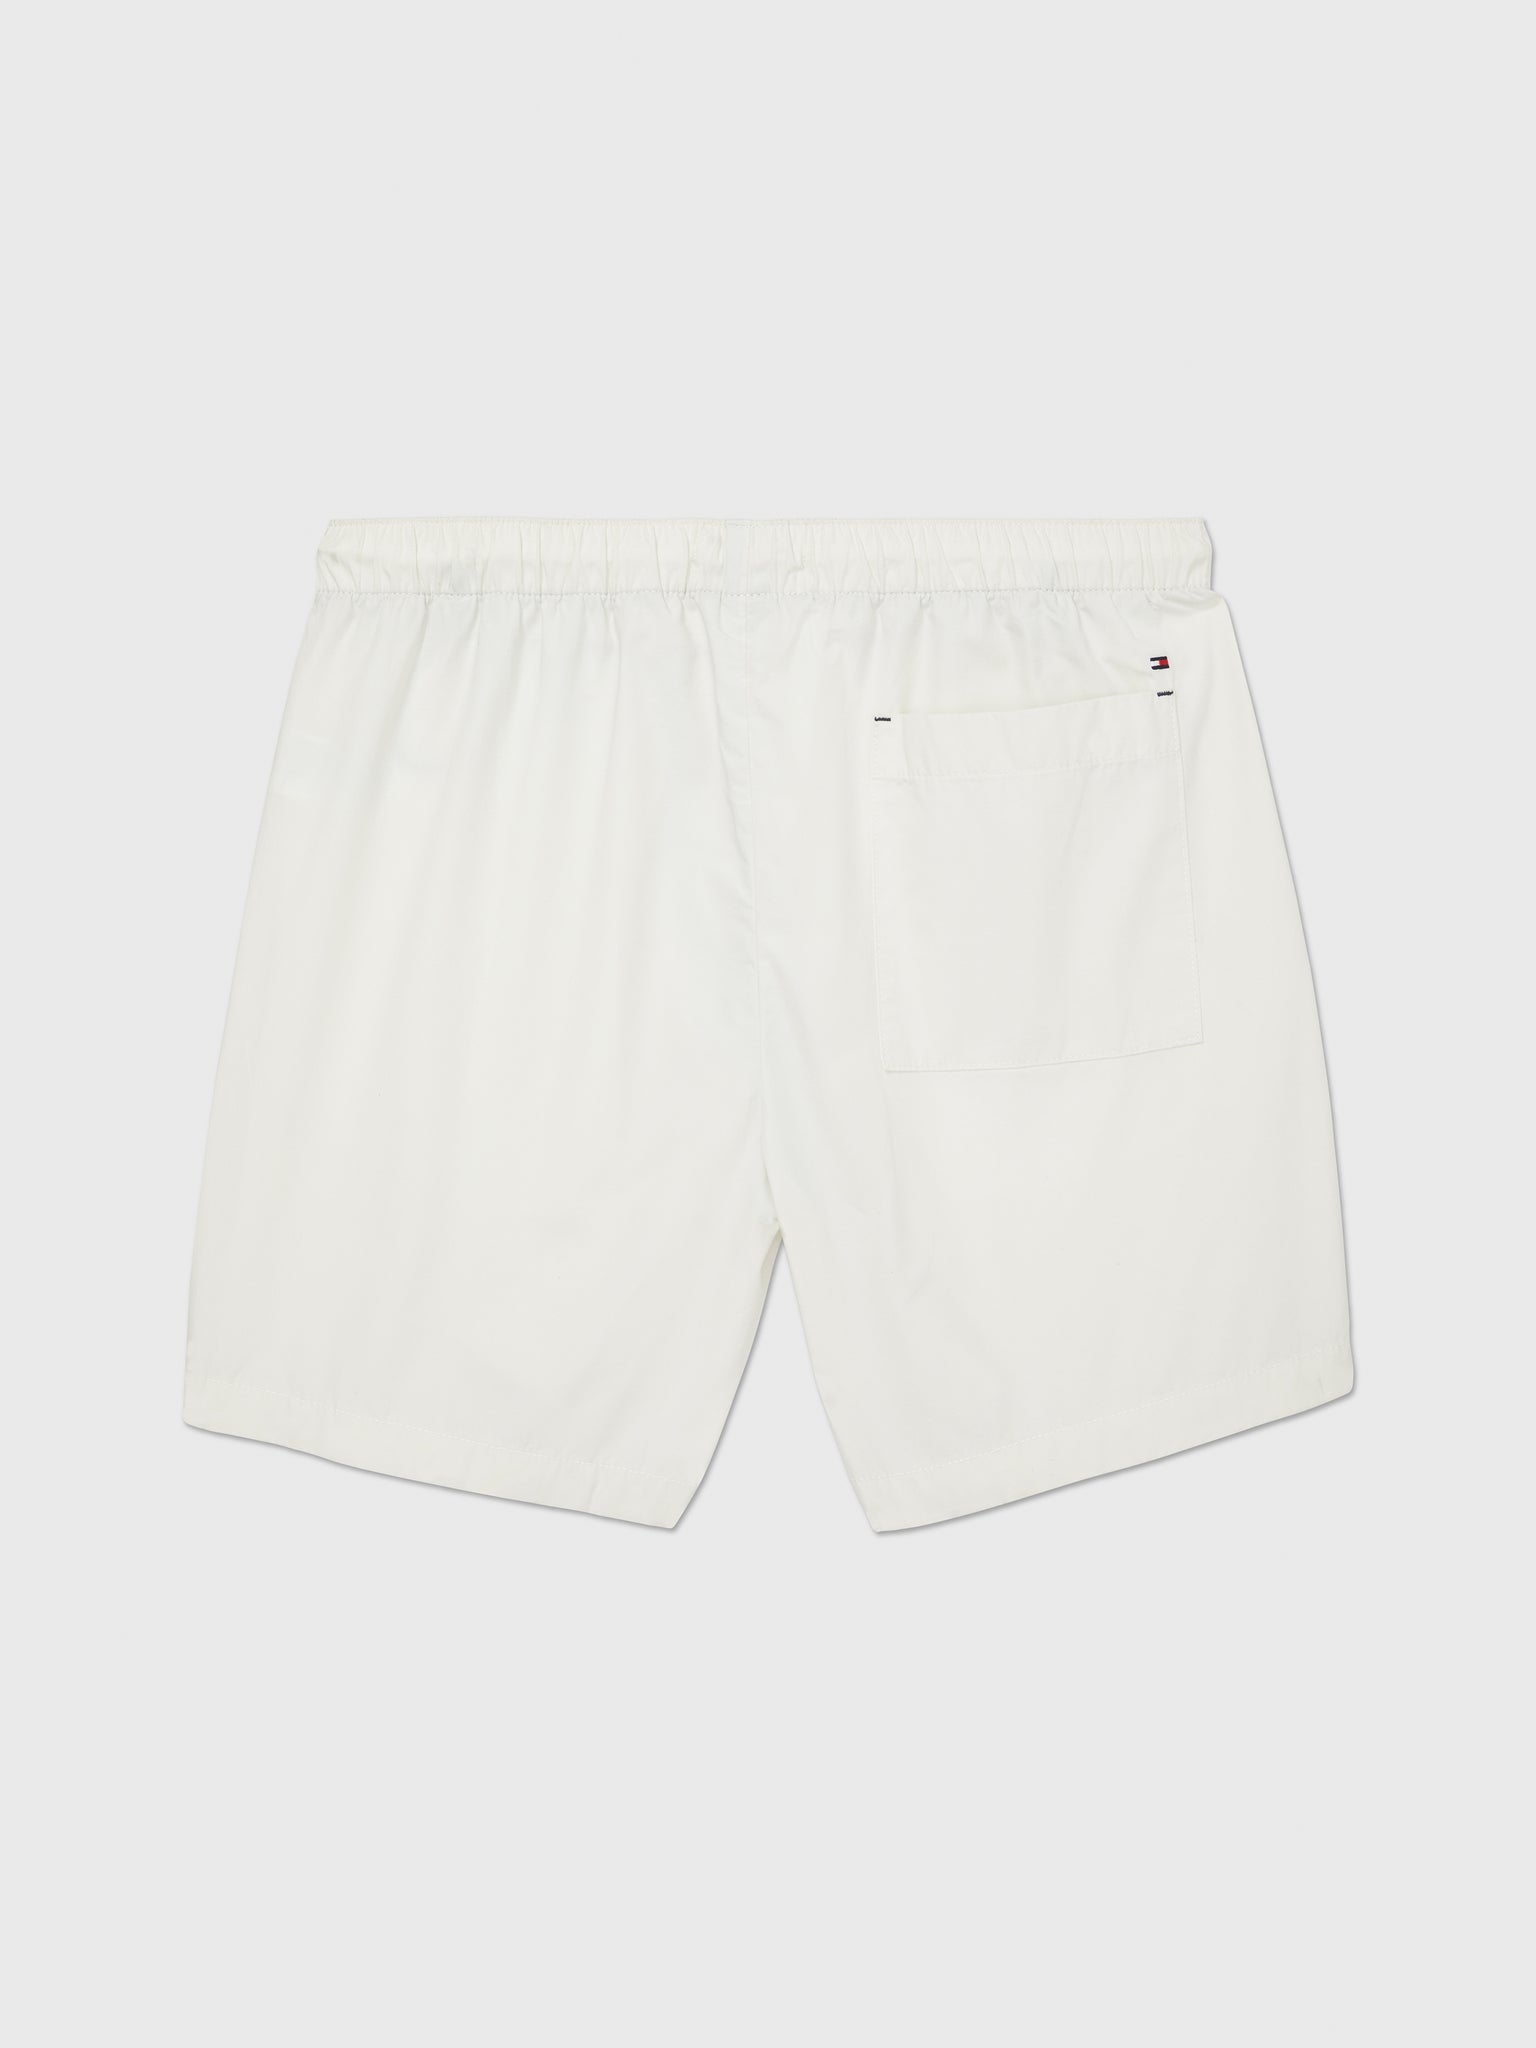 Crew Pull On Shorts (Mens) -White Suede